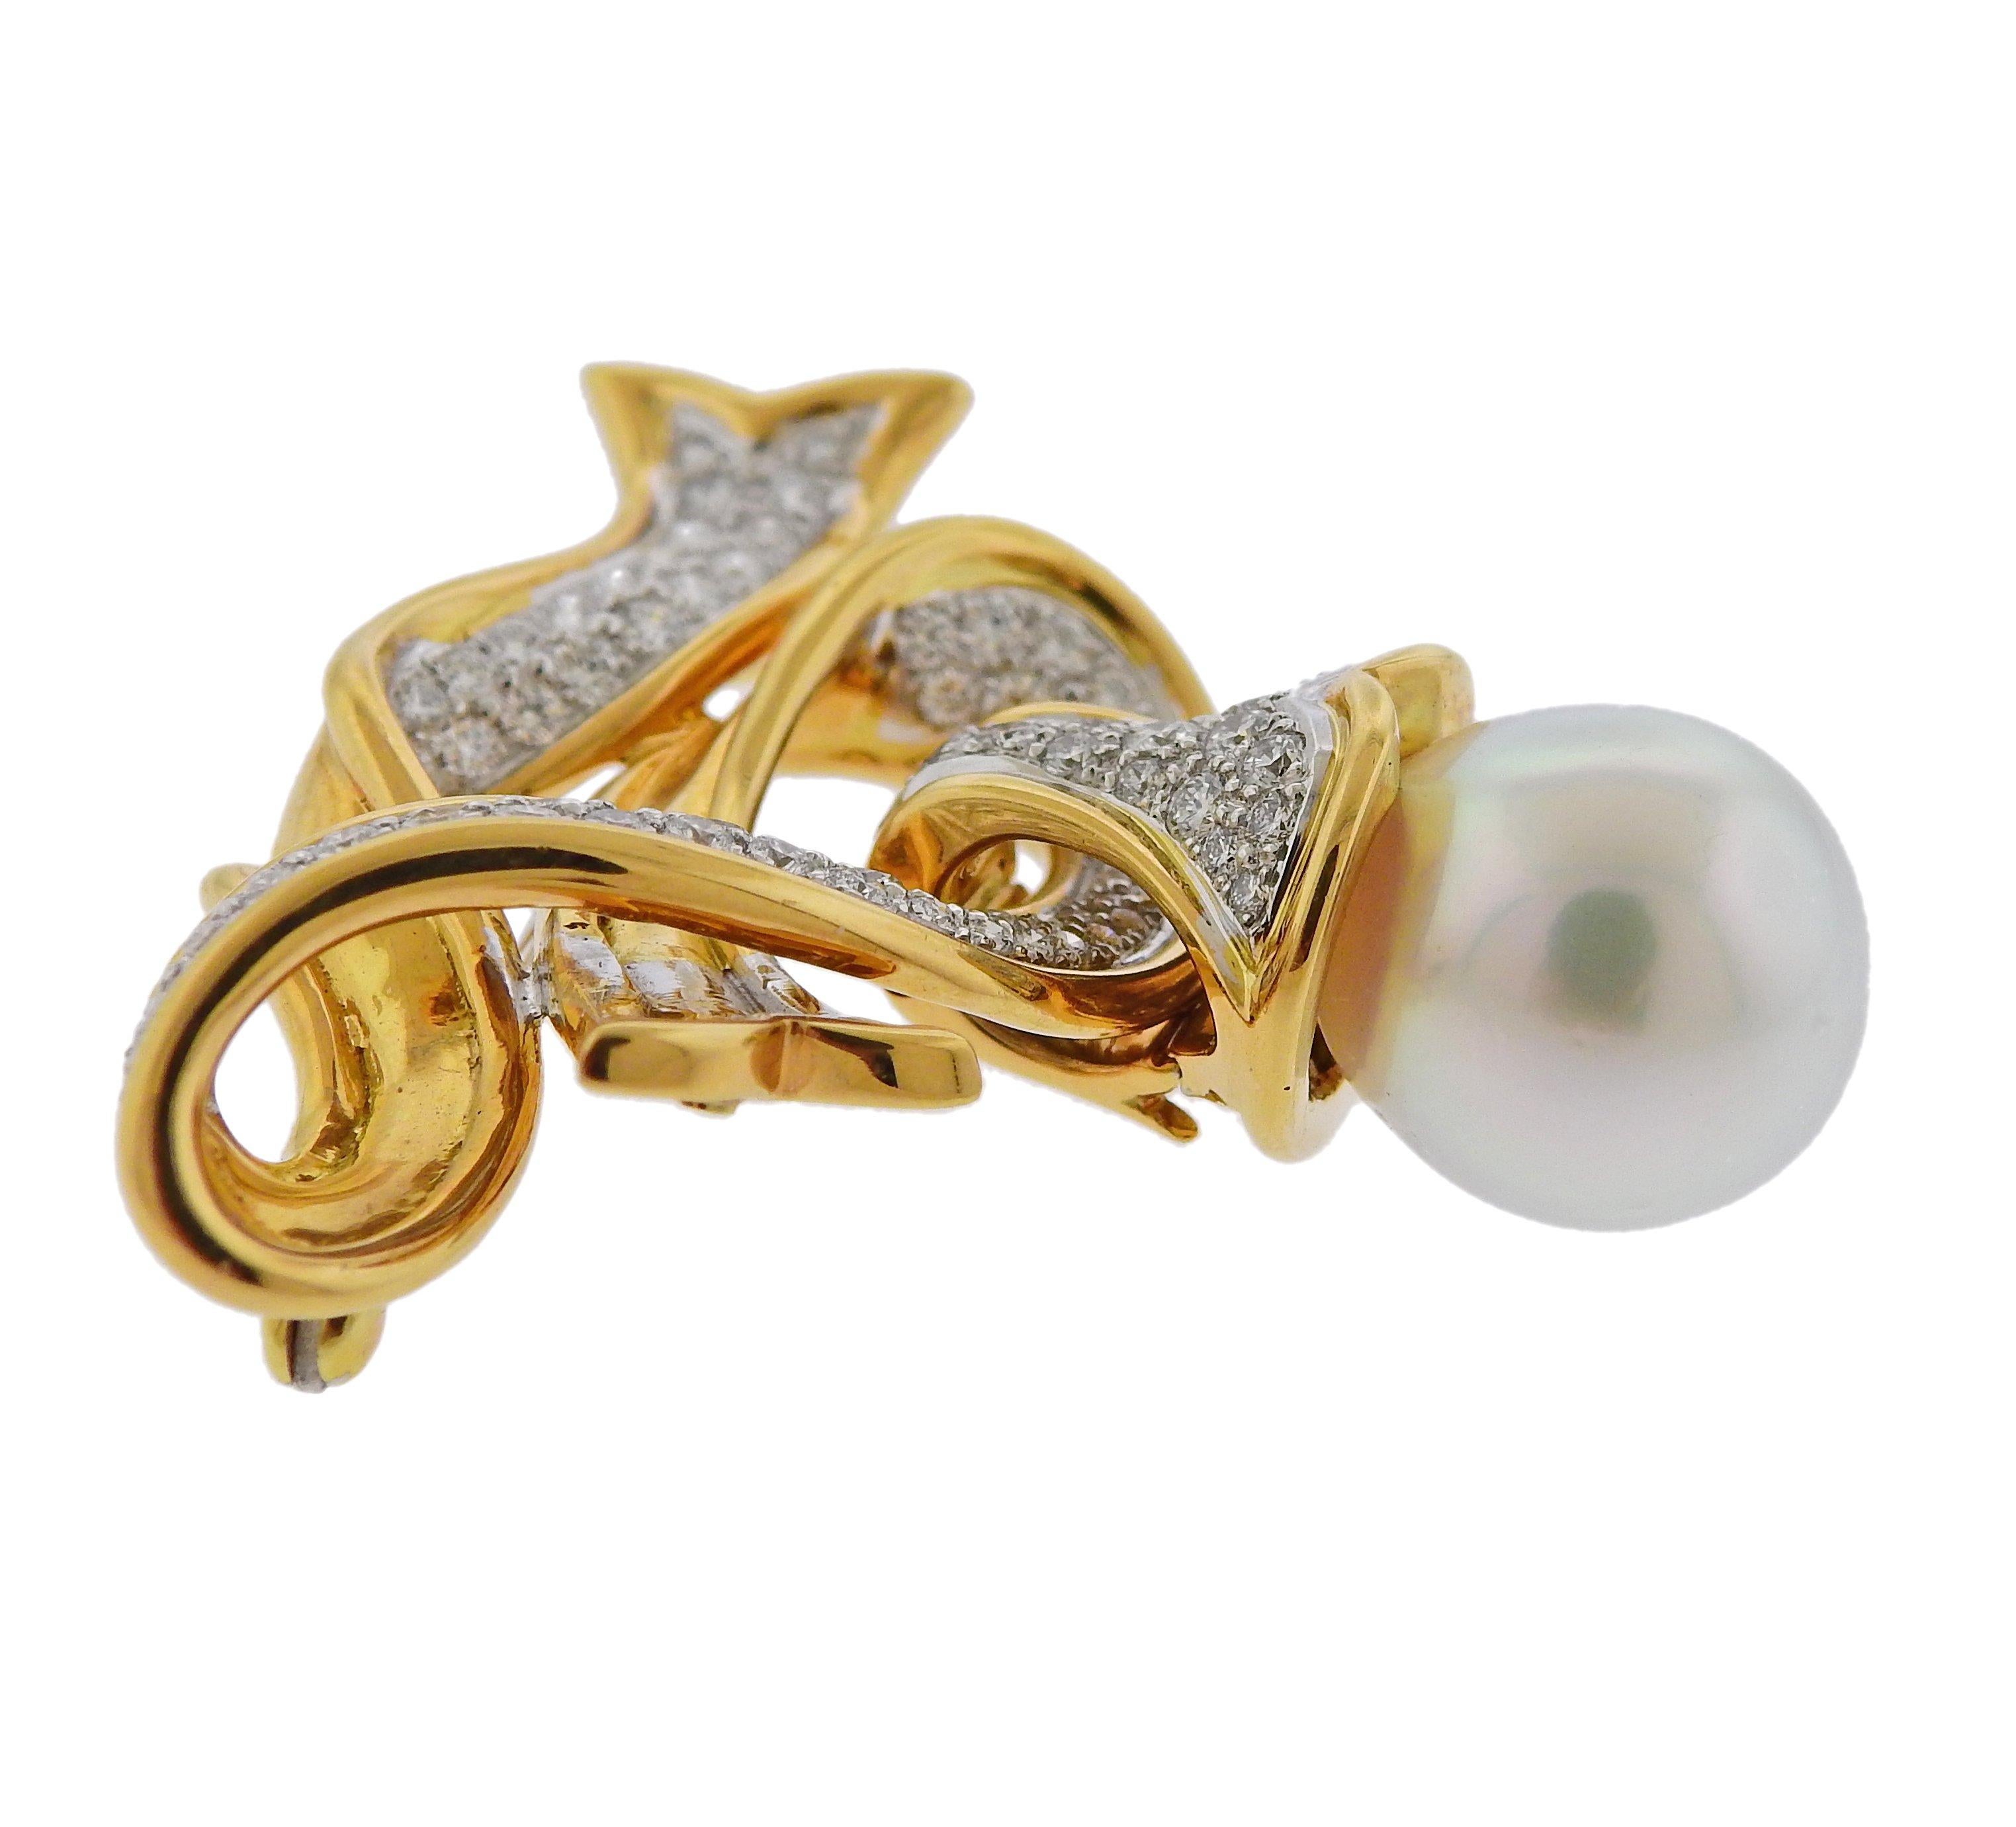 Impressive 18k gold and platinum brooch pendant by Angela Cummings, set with 13.9mm South Sea pearl and 2.74ctw in FG/VS diamonds. Brooch measures 45mm x 46mm, bottom pendant is removable 28mm x 16mm. Marked: Cummings, Assael, pt950, 750. Weight is